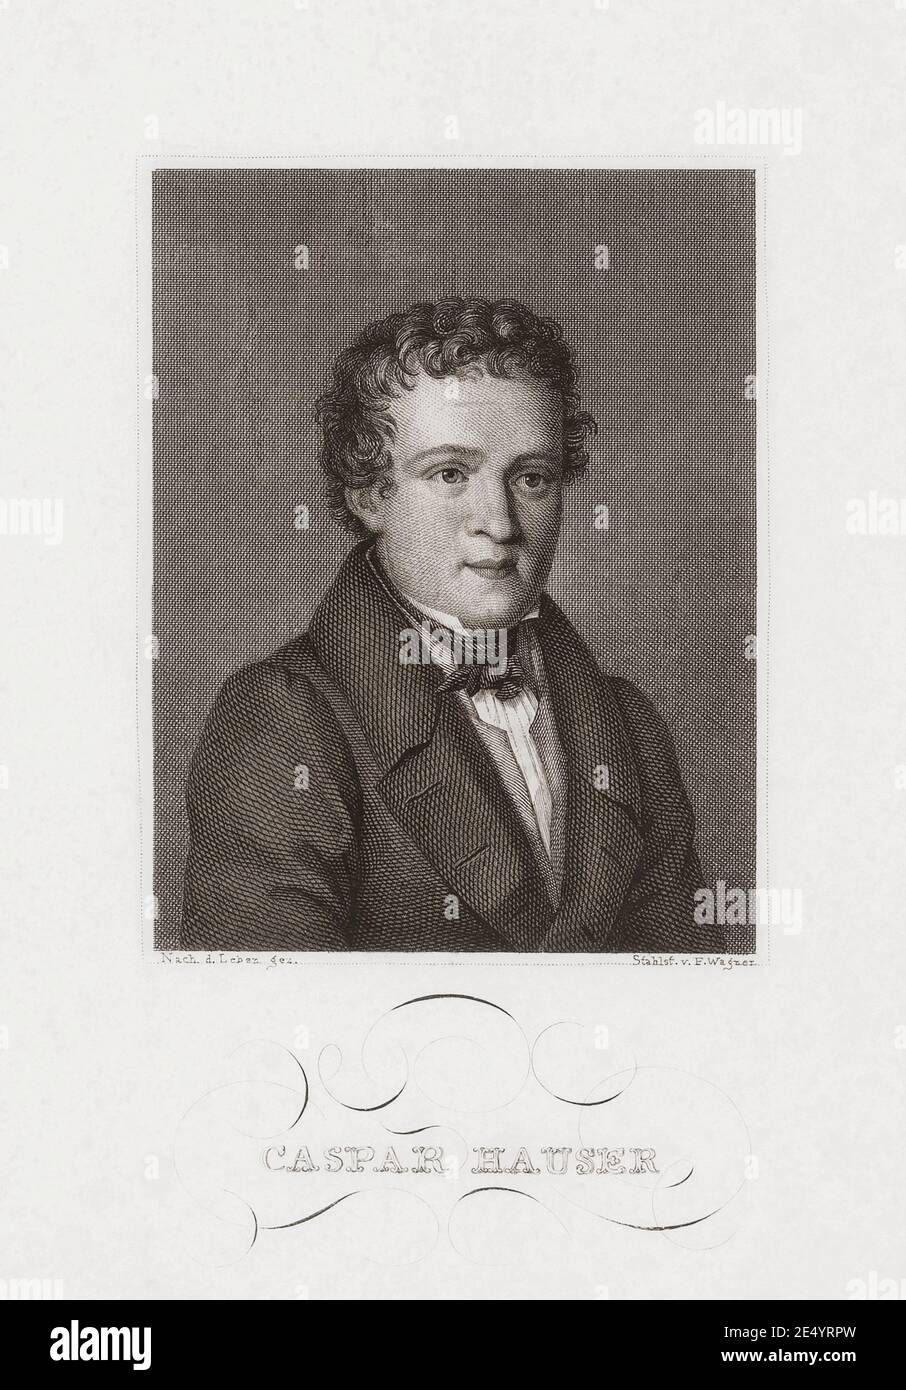 Kaspar Hauser, c. 1812 - 1833.  Hauser mysteriously appeared in 1828 claiming he had been locked in a dungeon since he was a small child.  His strange case titillated public fancy.  Amongst rumours were one that he was the hereditary Prince of Baden.  His death from a stab wound in 1833 added further mystery to his case:  some thought he had been murdered, others that he had stabbed himself.  After a work by Friedrich Wagner. Stock Photo